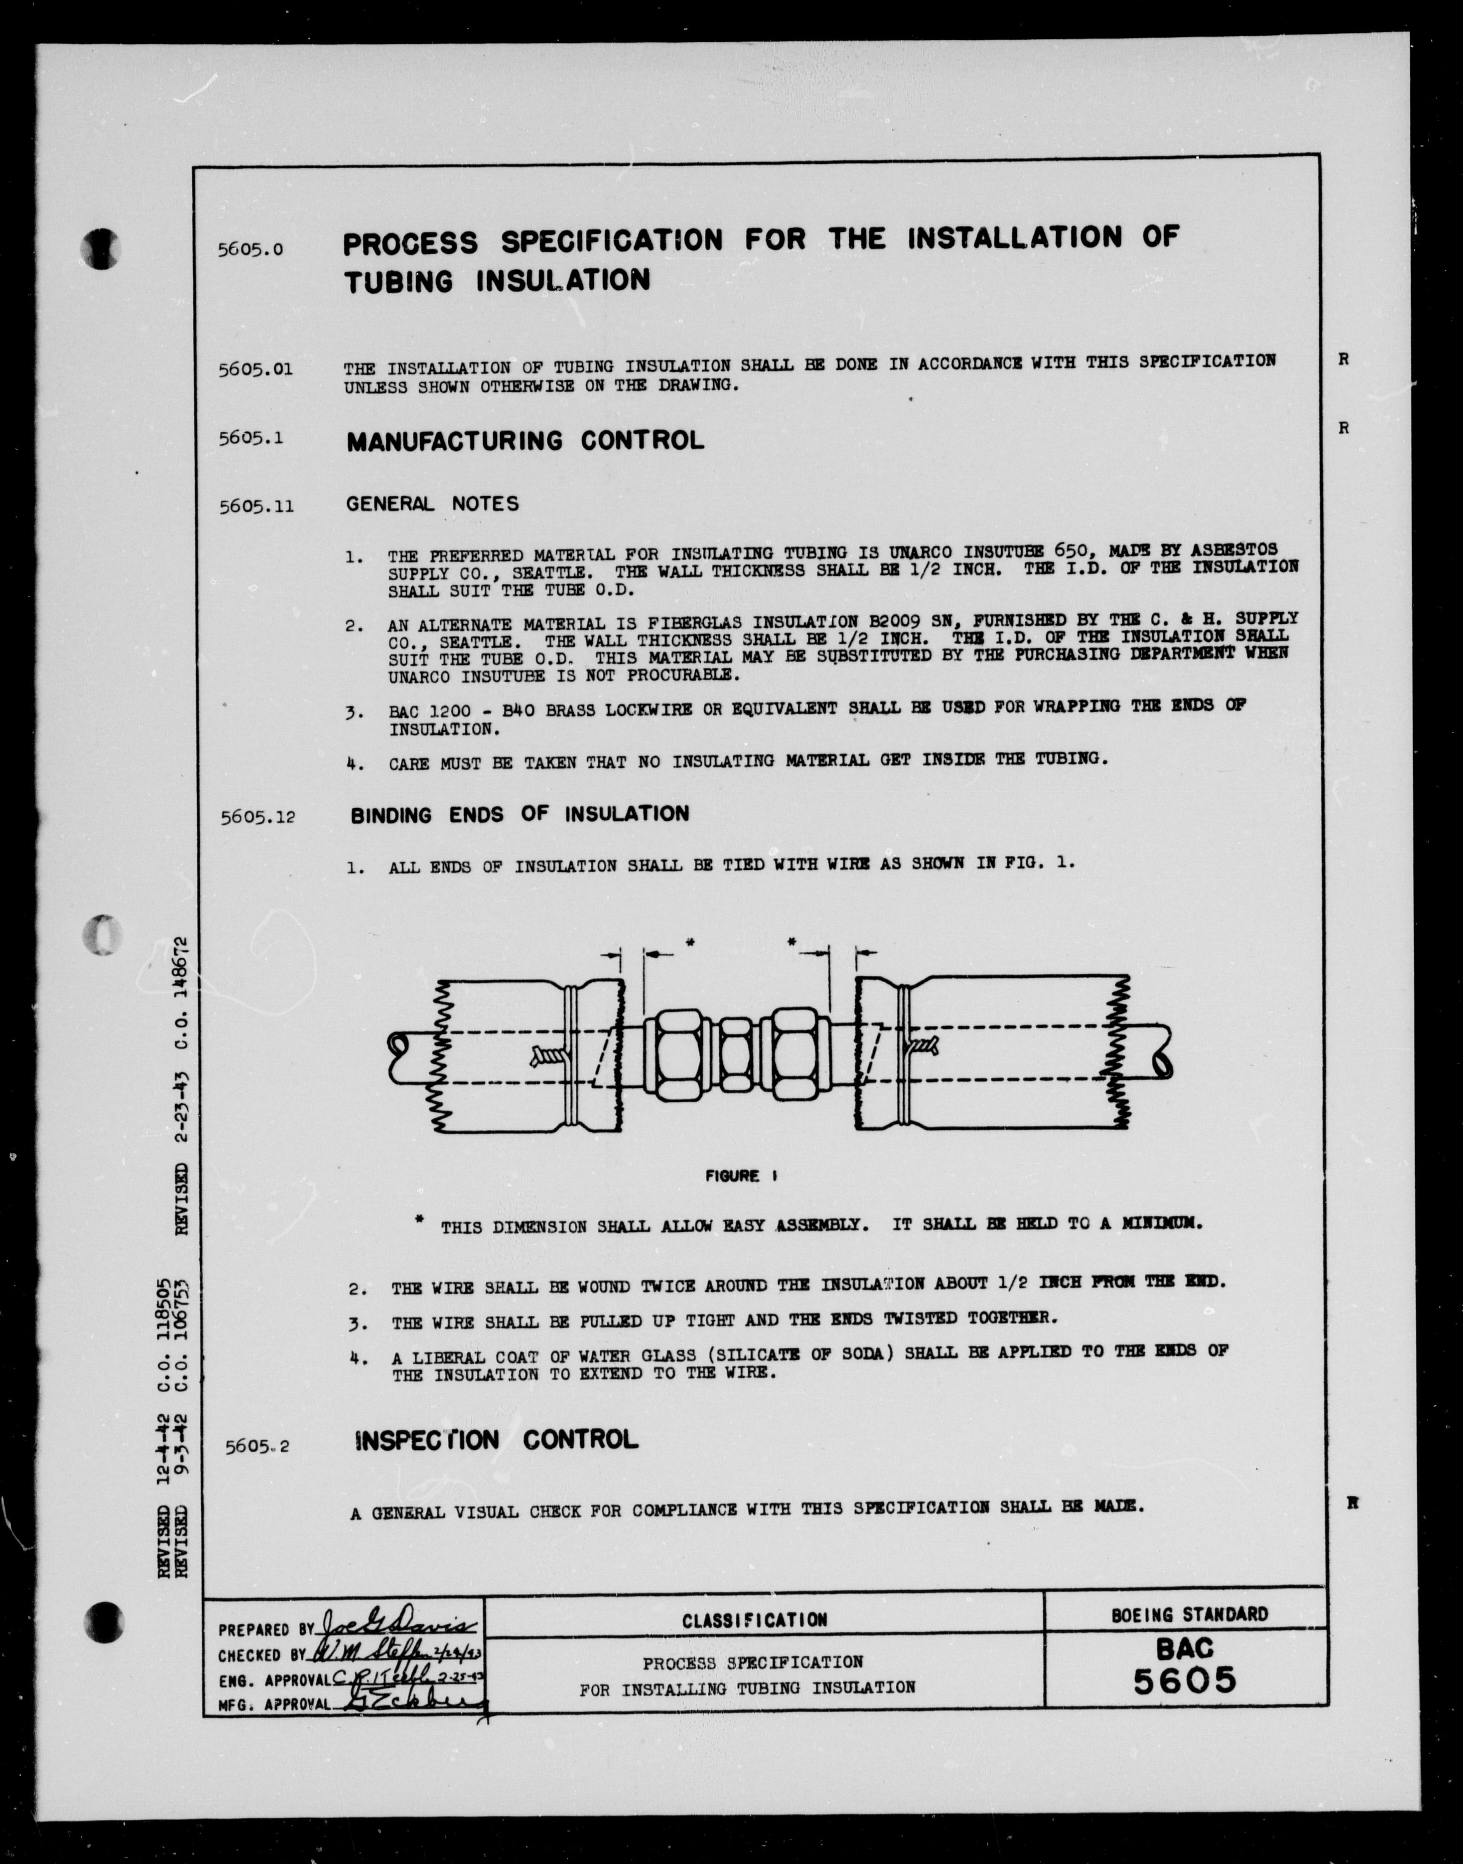 Sample page 1 from AirCorps Library document: Installing Tubing Insulation